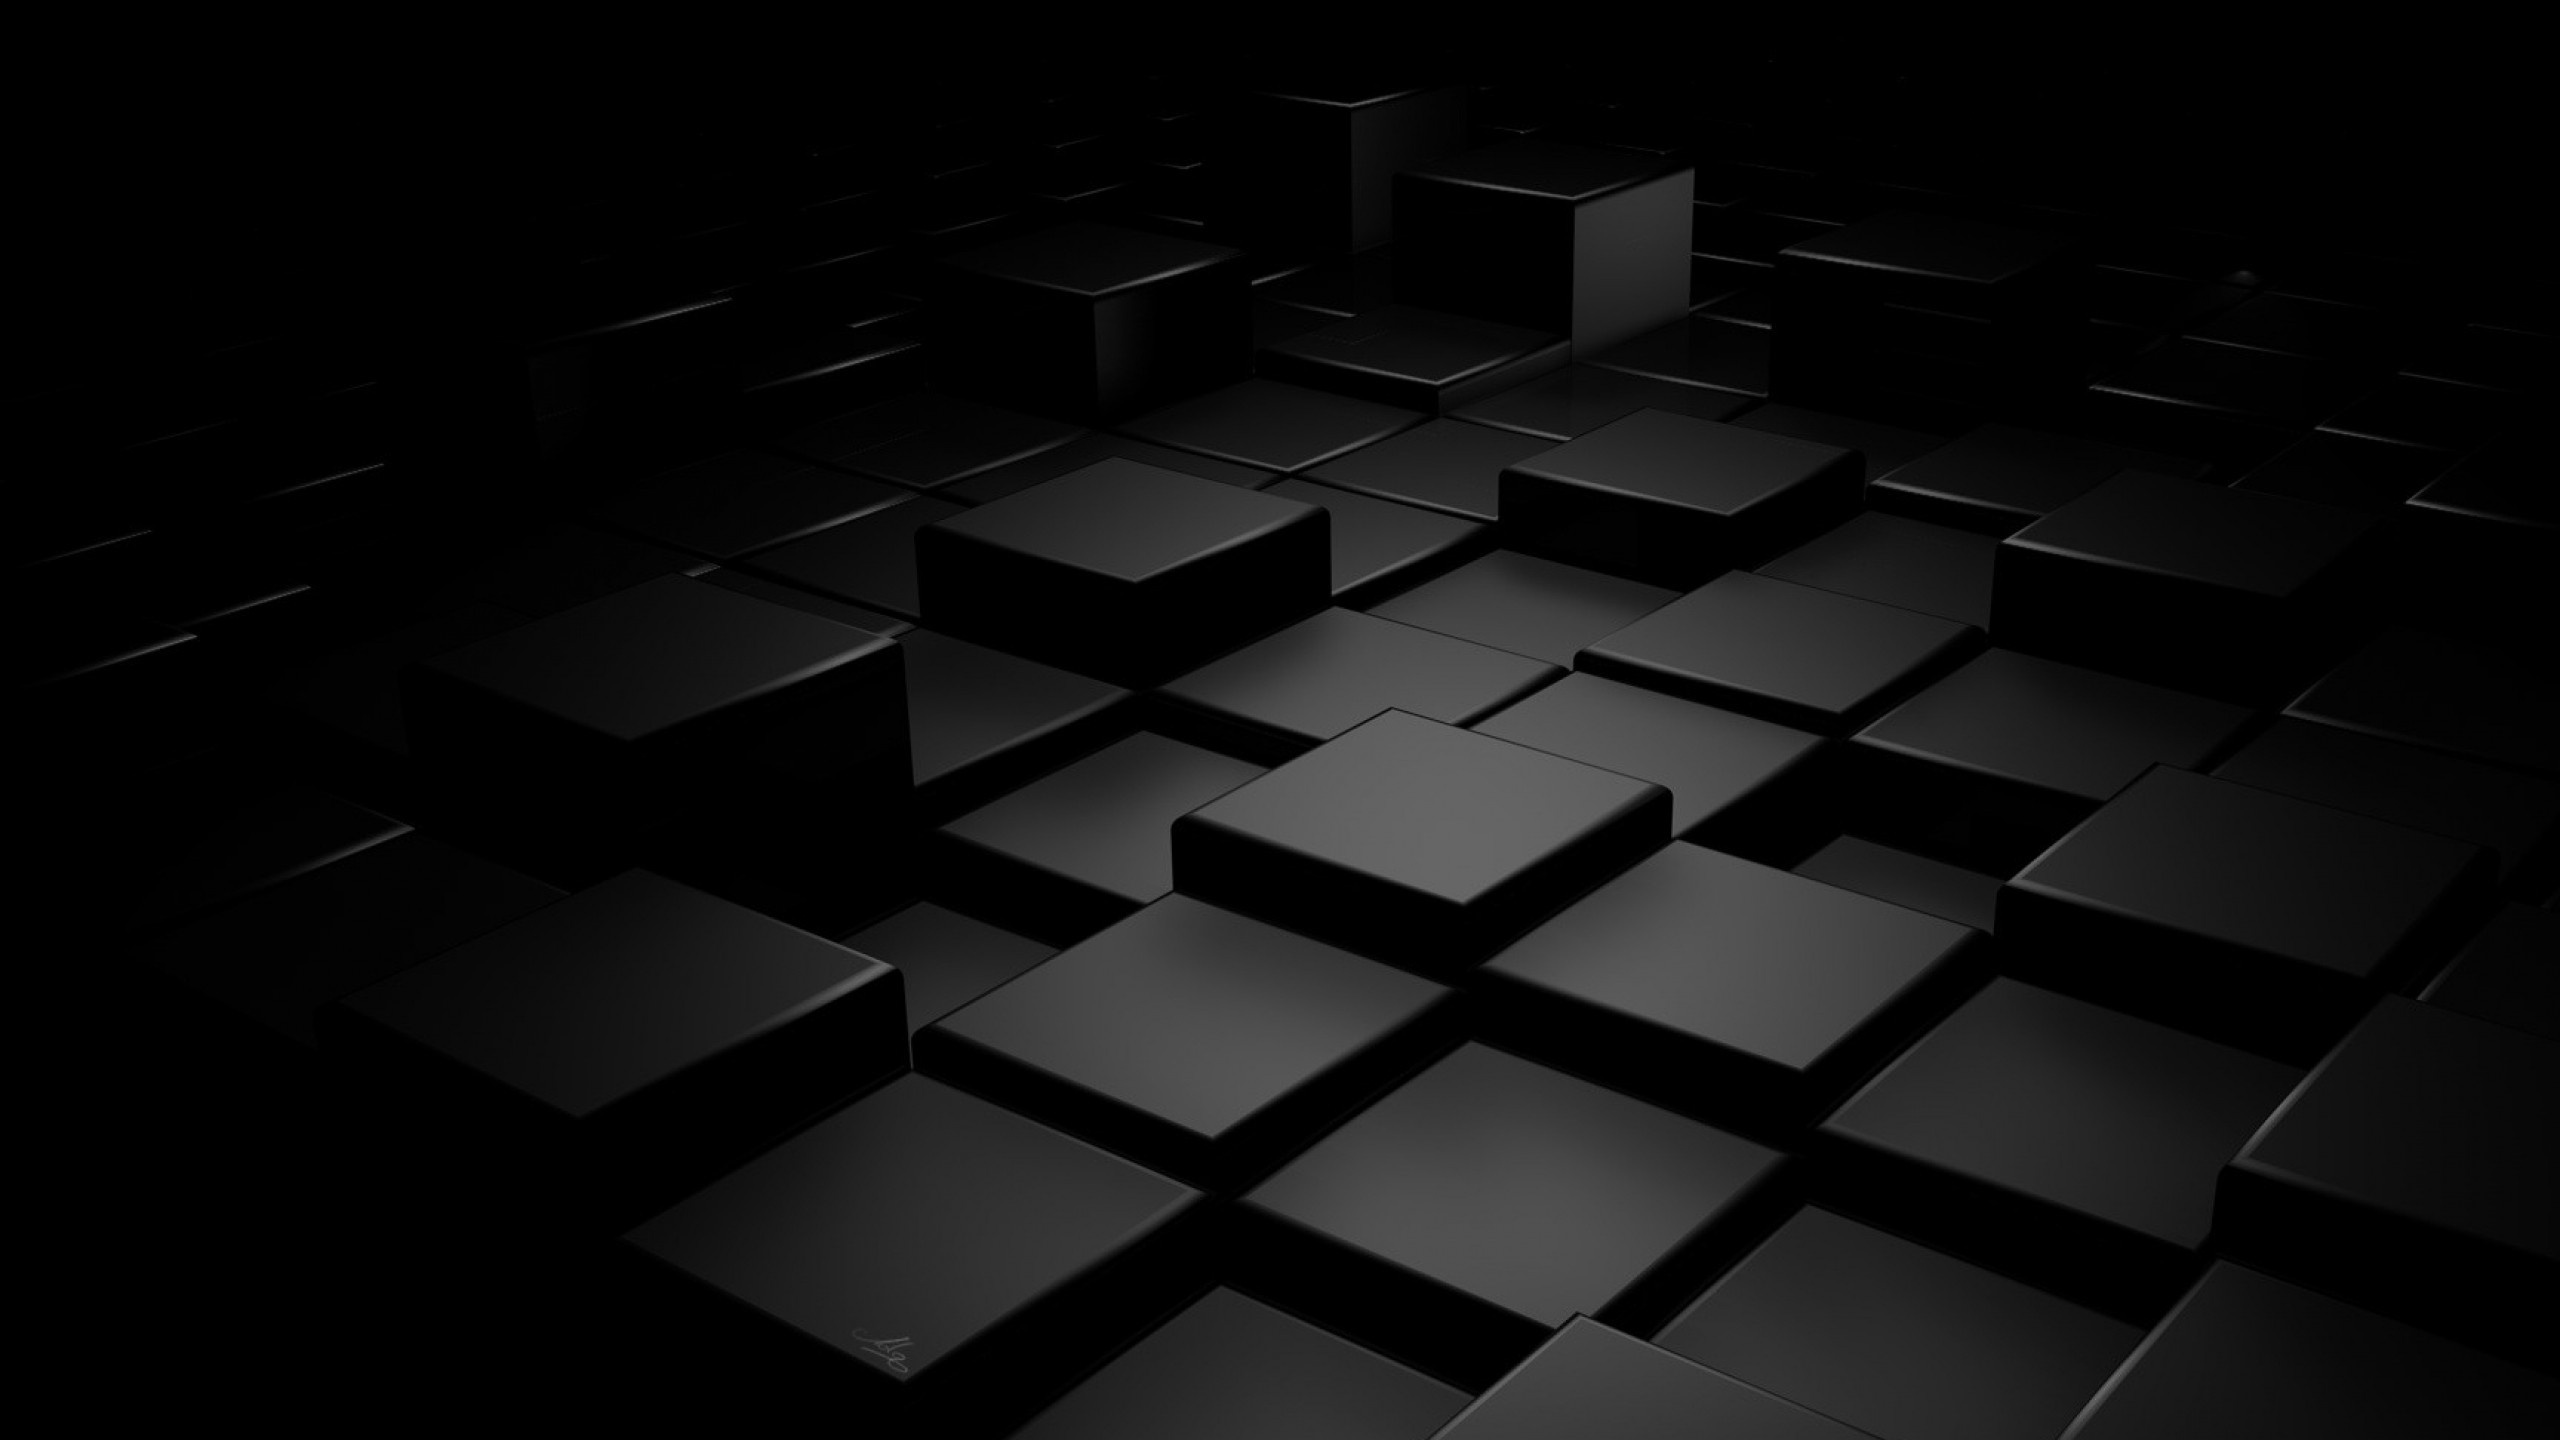 Black and White Checkered Illustration. Wallpaper in 2560x1440 Resolution